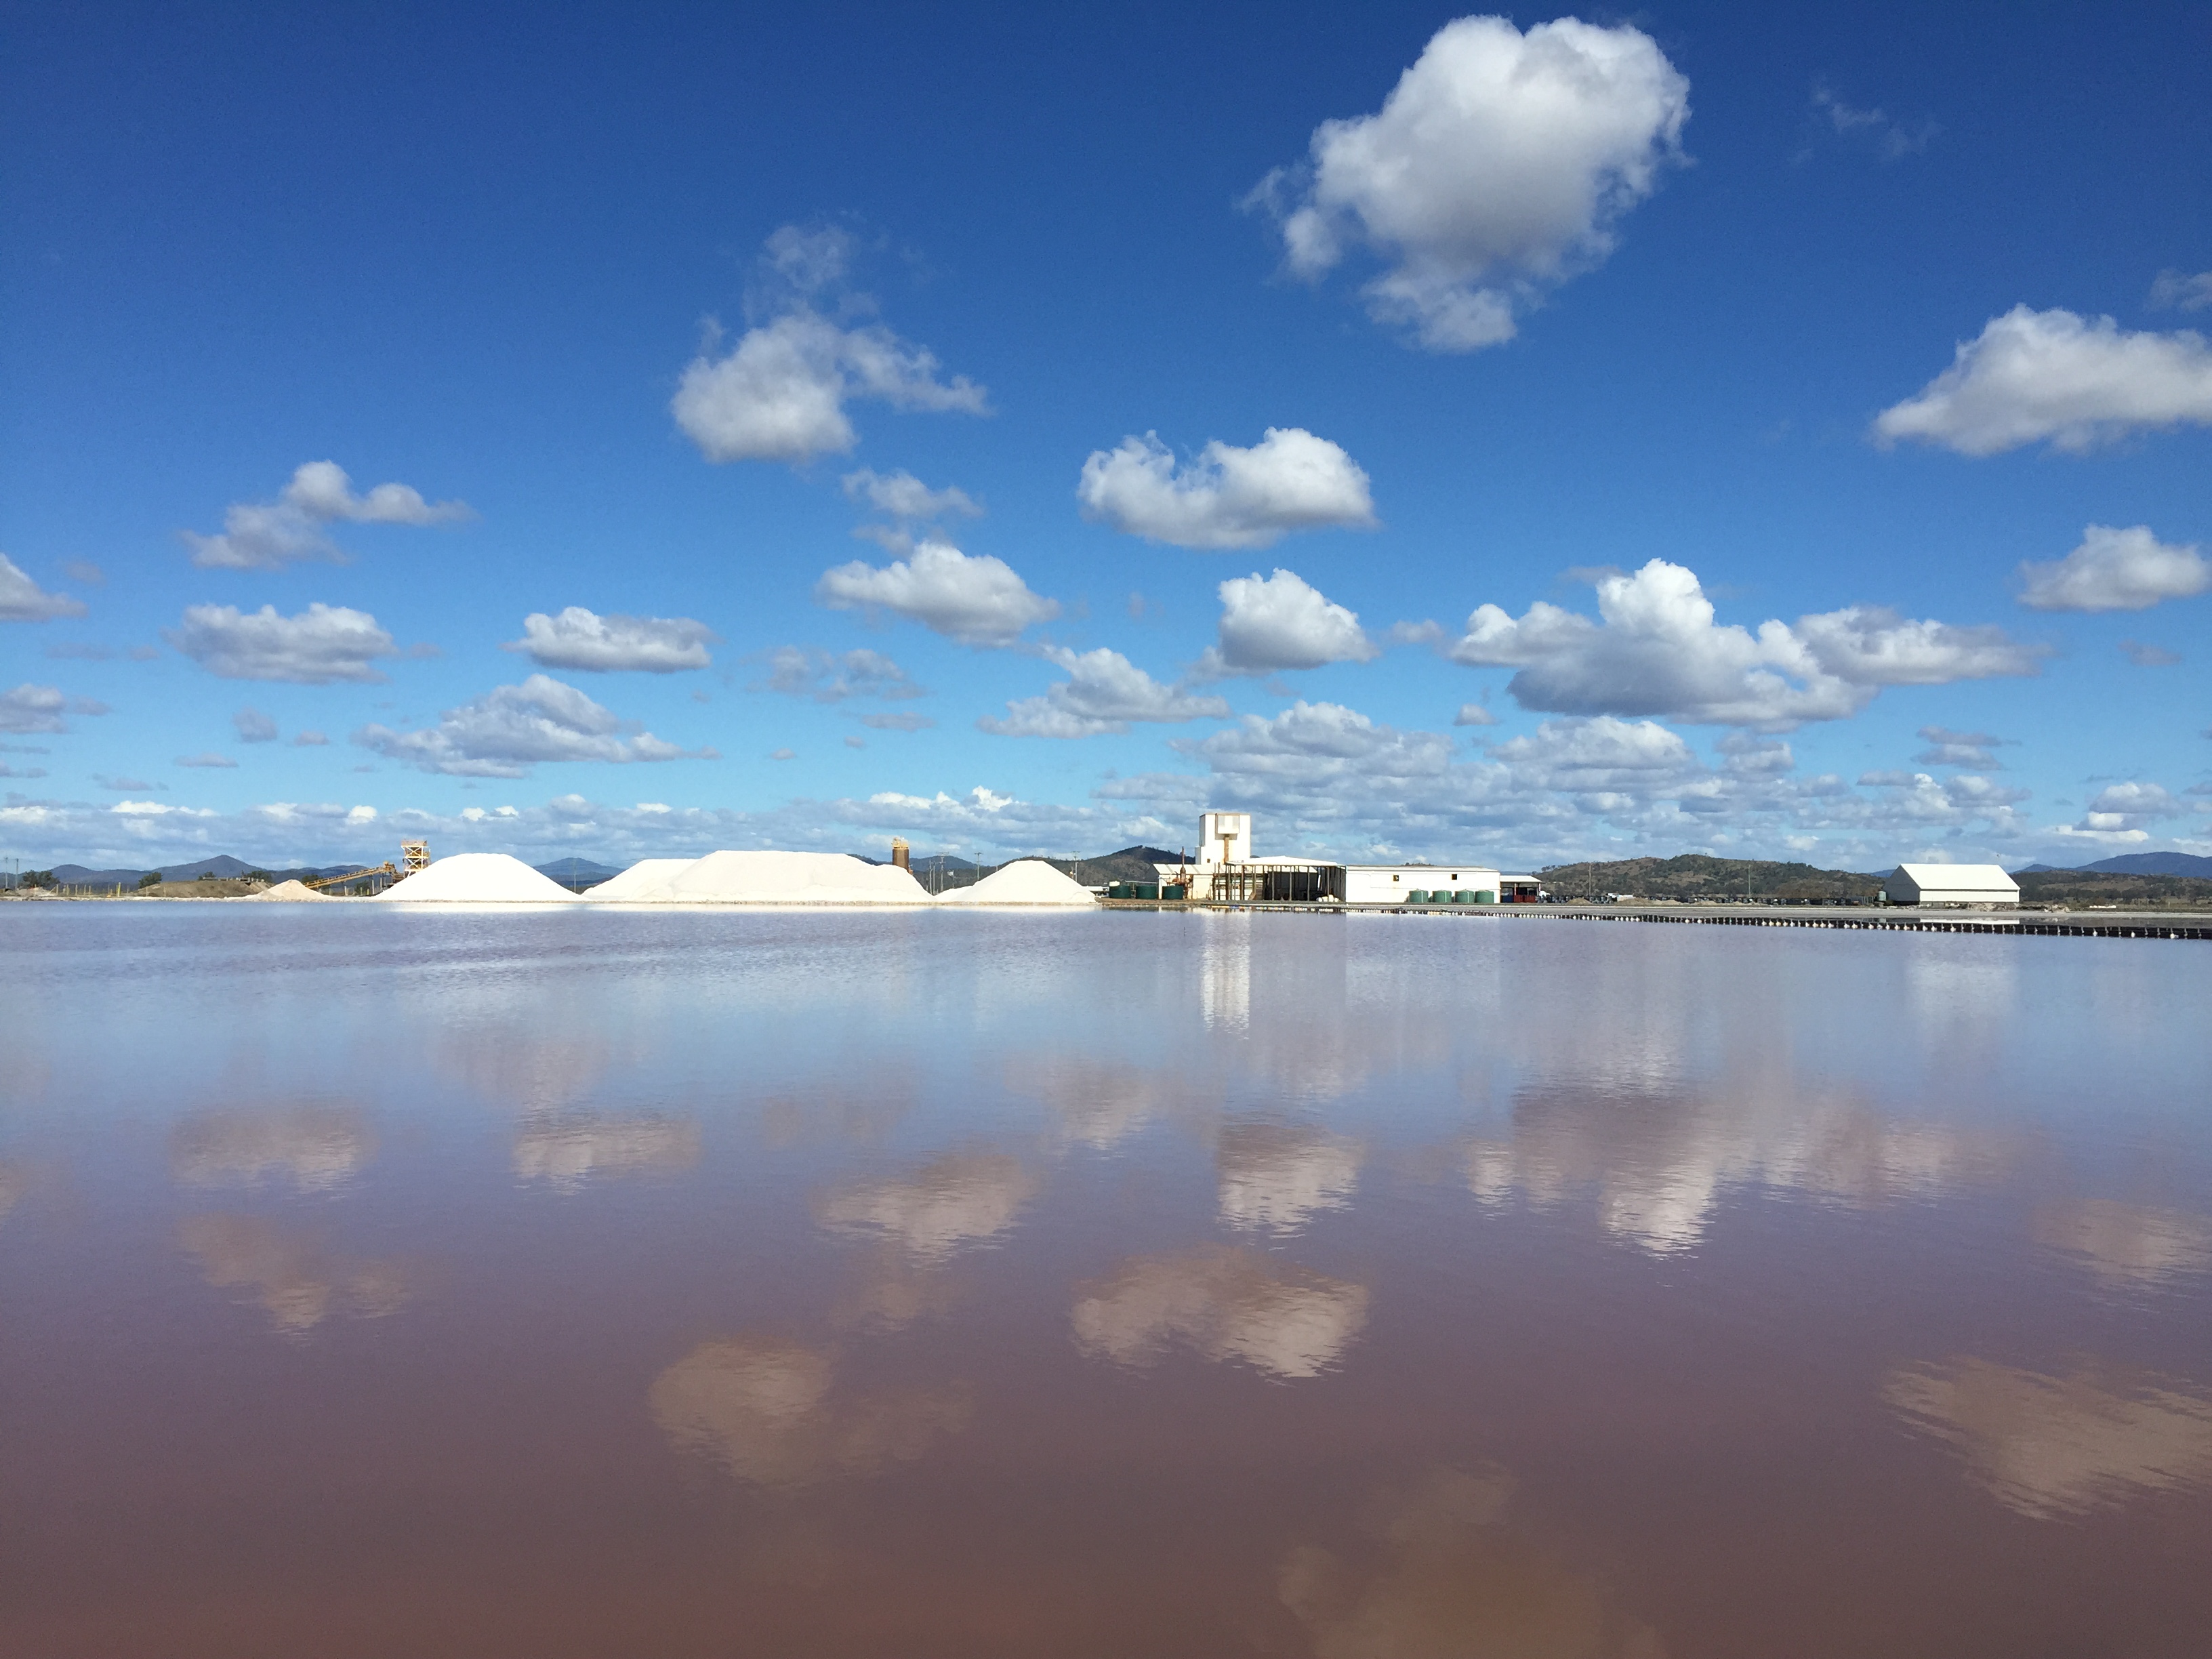 An image of a salt mine. Clouds are reflected in the water in the scenic photo.